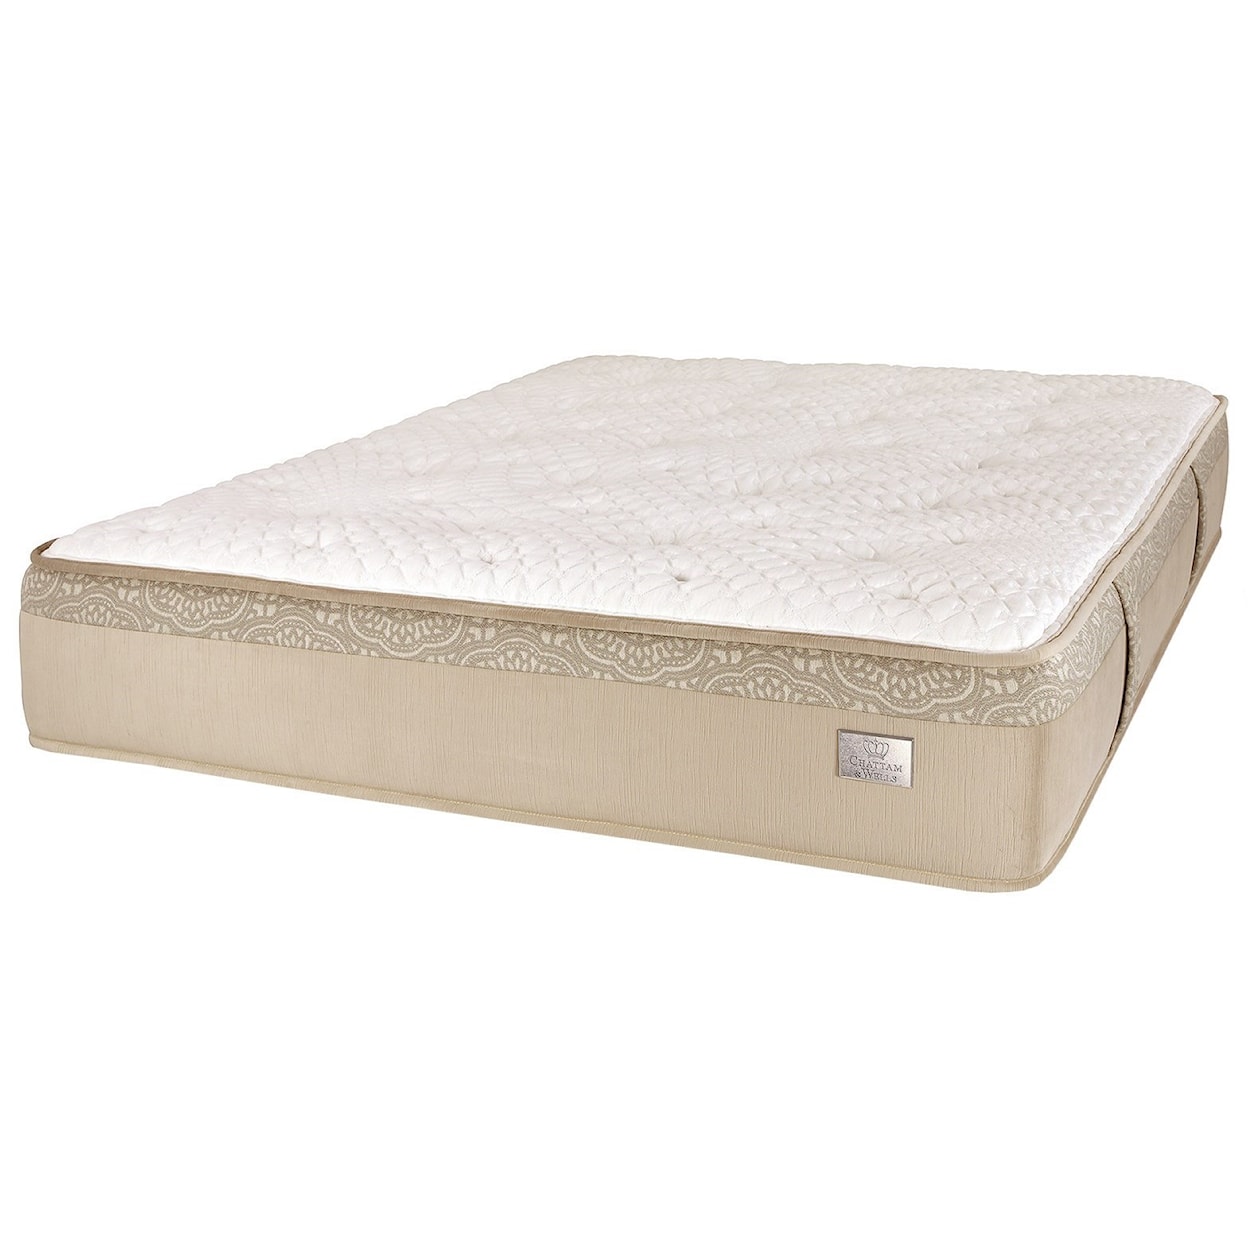 Spring Air Showstopper Firm King Pocketed Coil Mattress